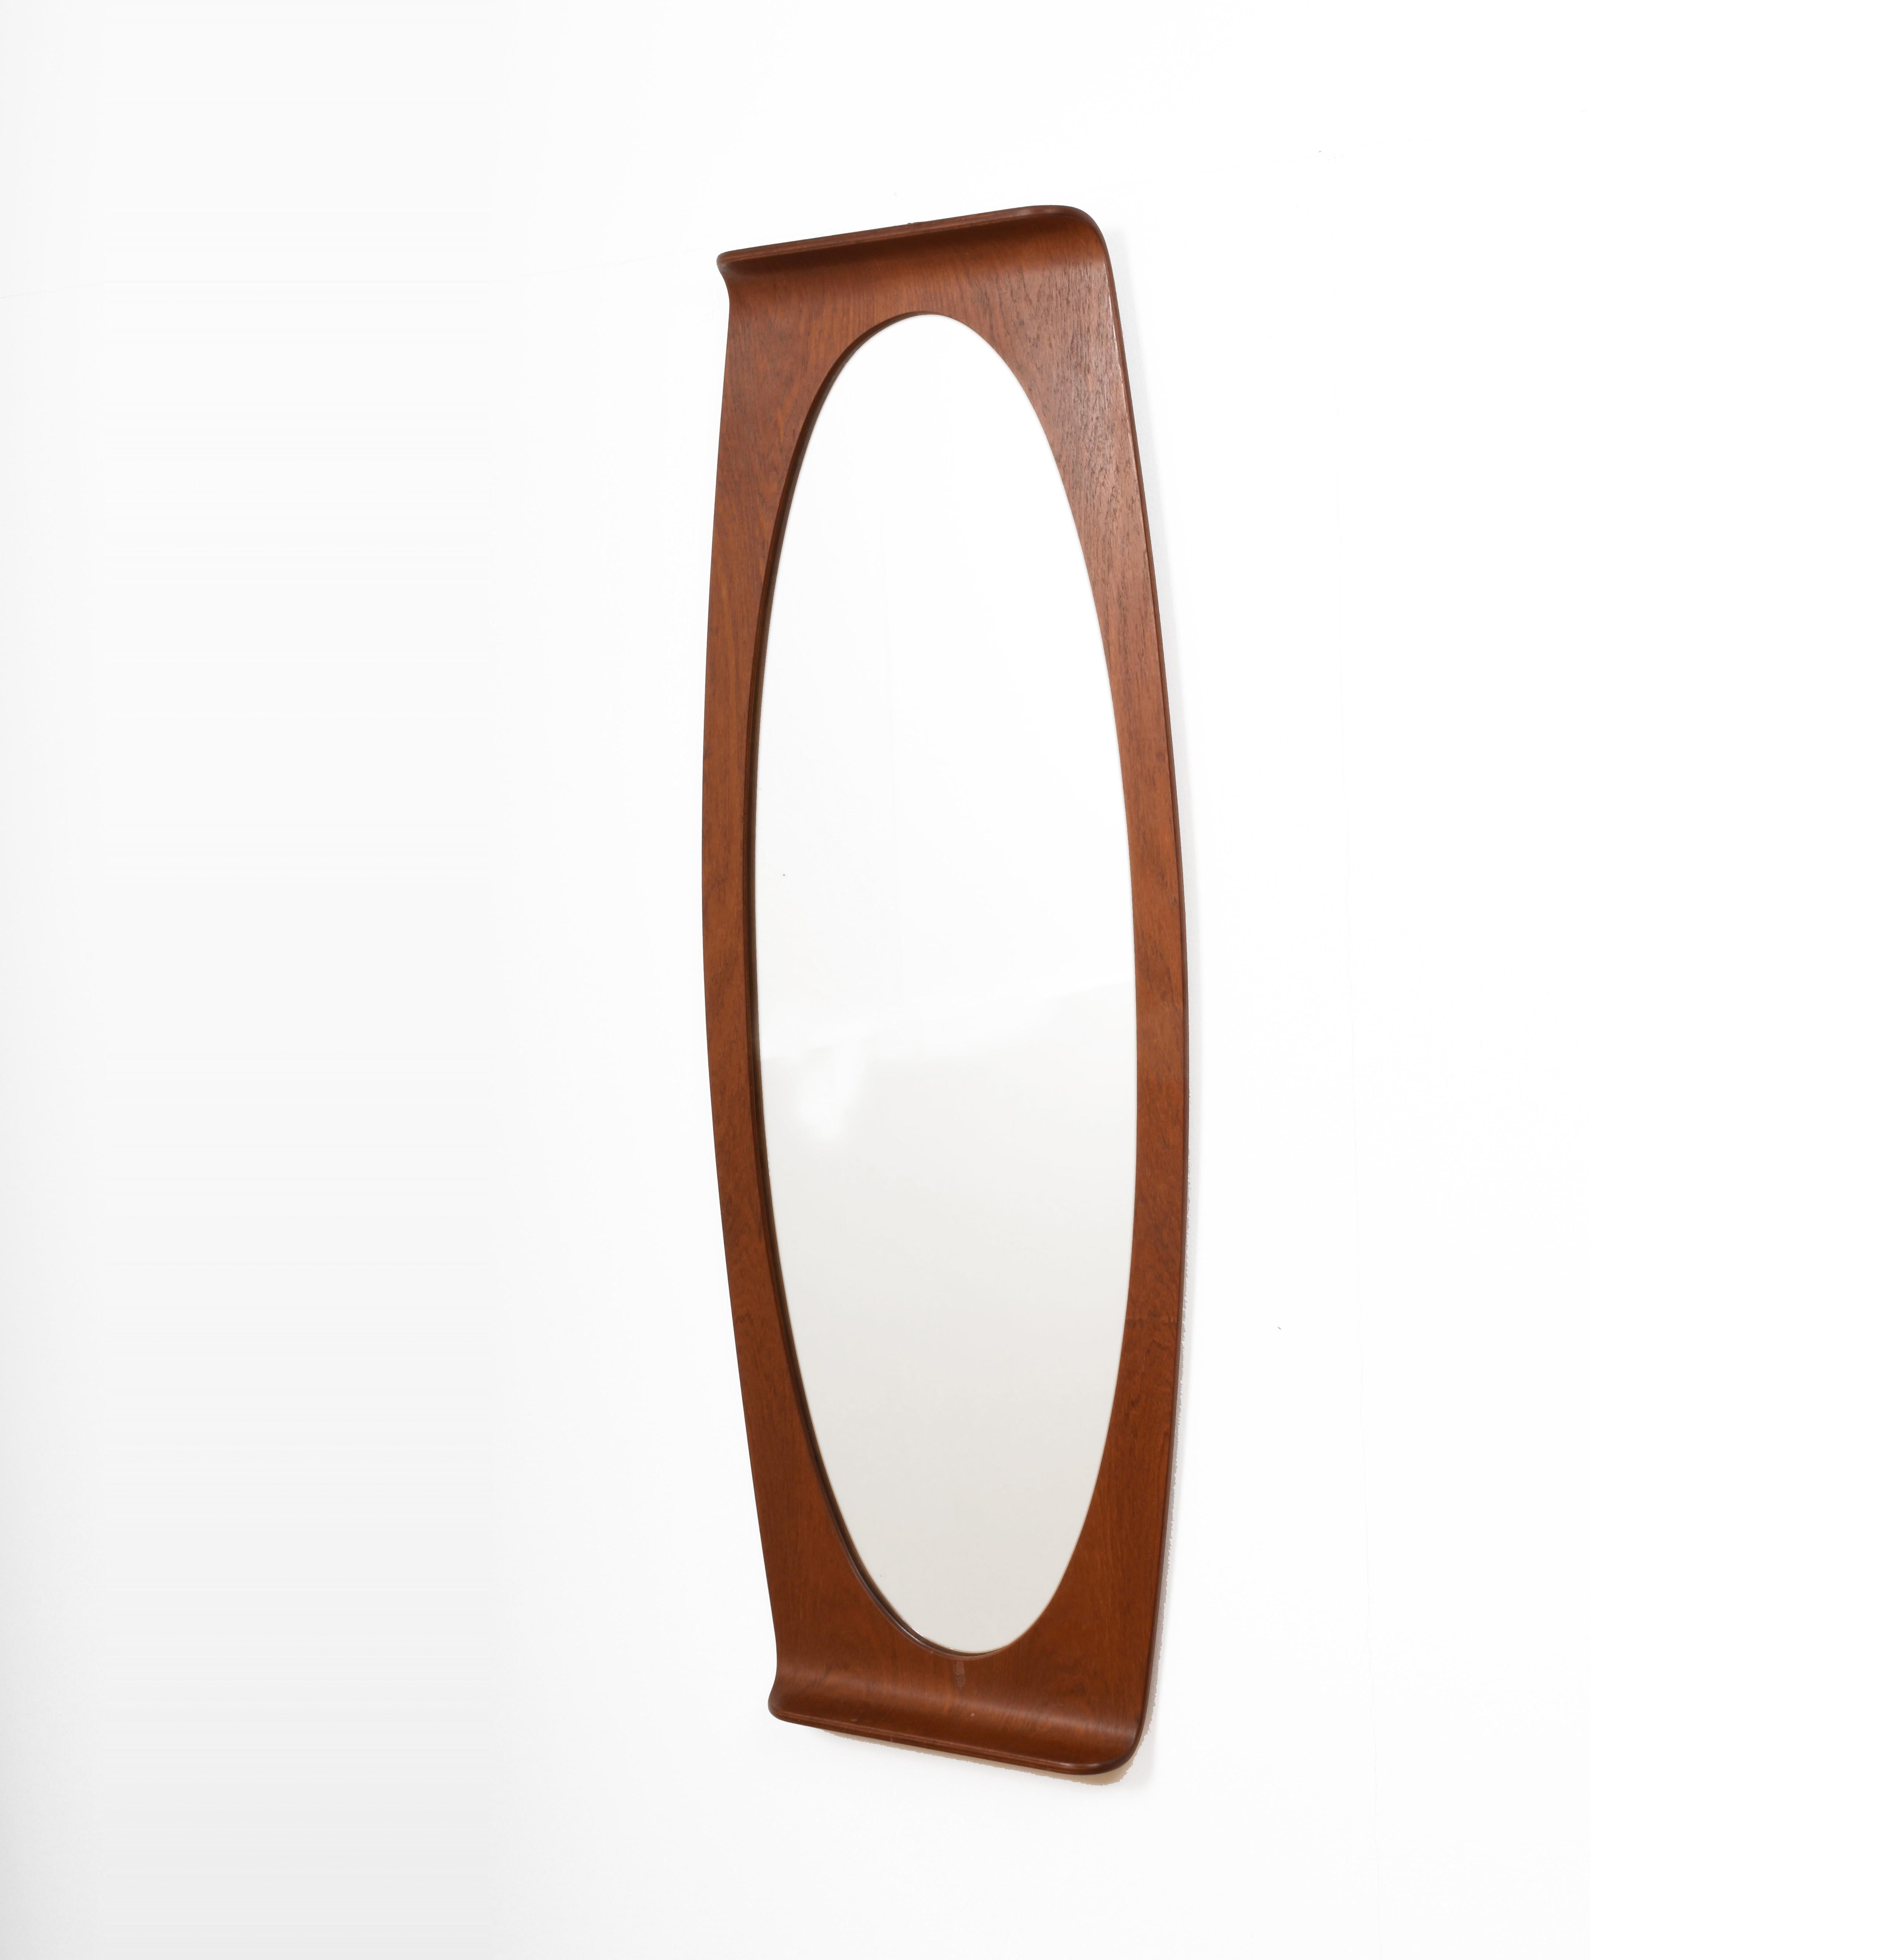 Franco Campo & Carlo Graffi wall mirror in curved wood, Italy, 1960s.